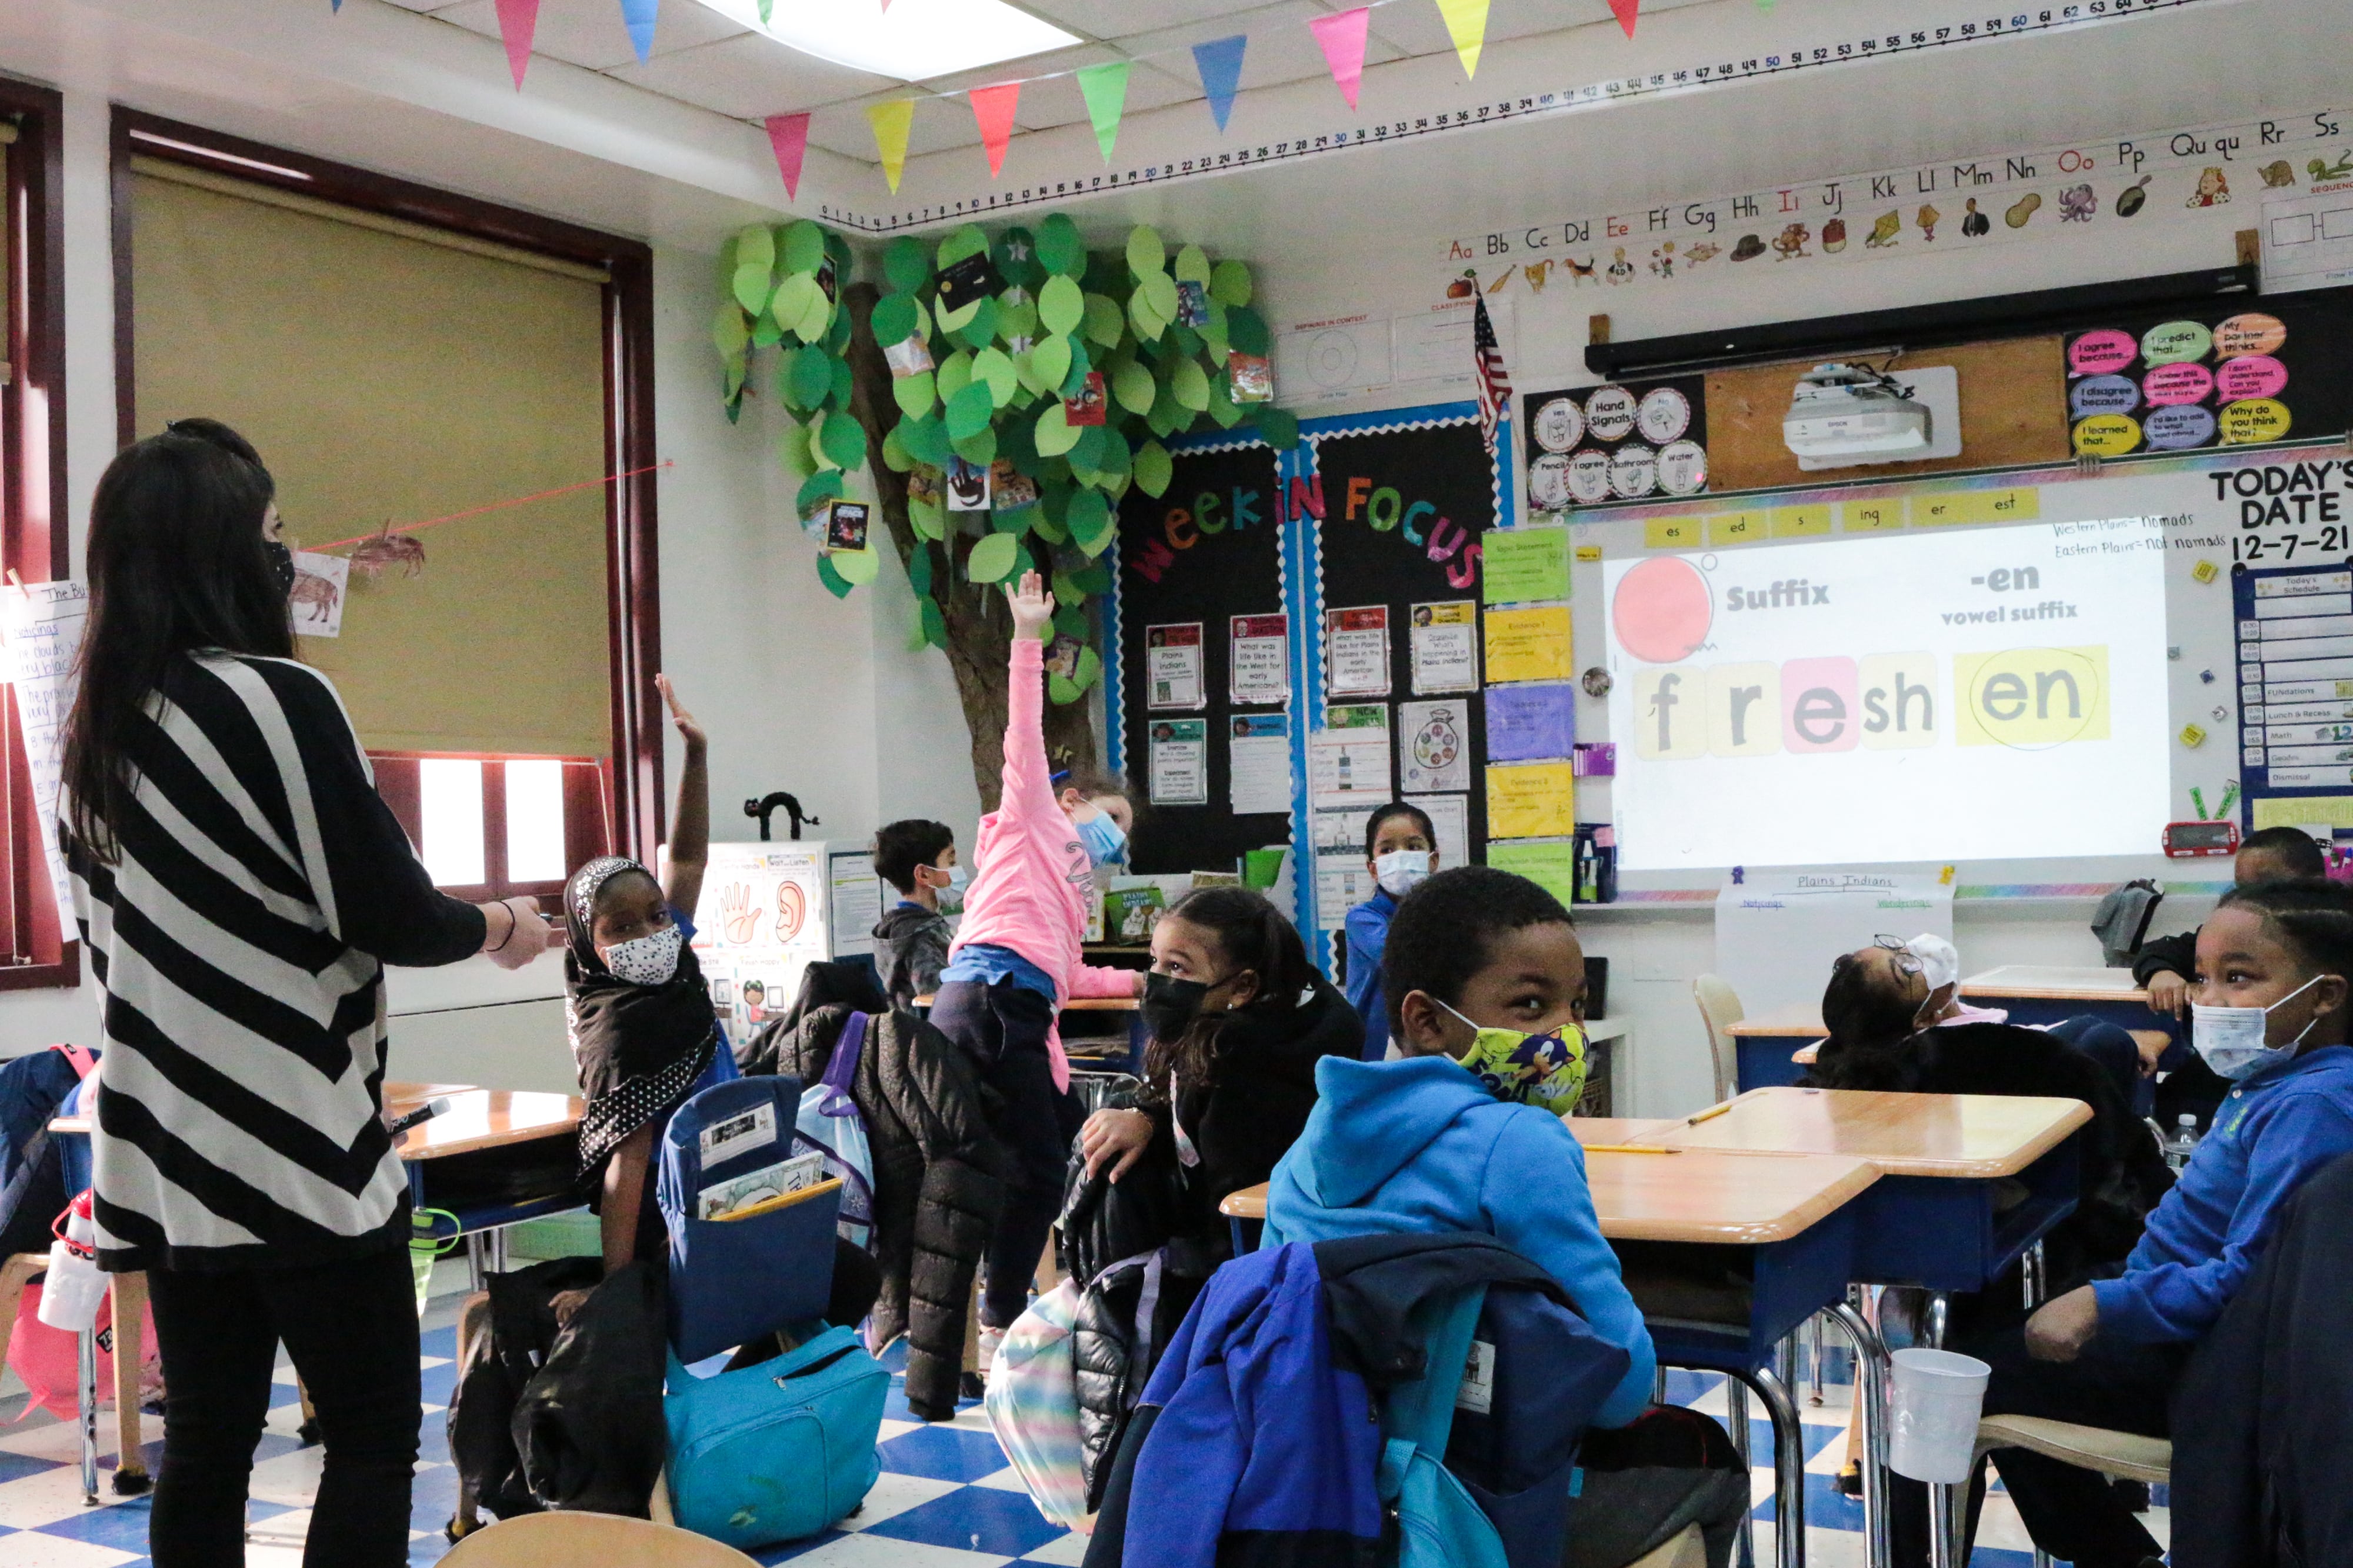 A teacher works with students on a reading exercise; students emphatically raise their hands as the projector on a white board reads “freshen.”